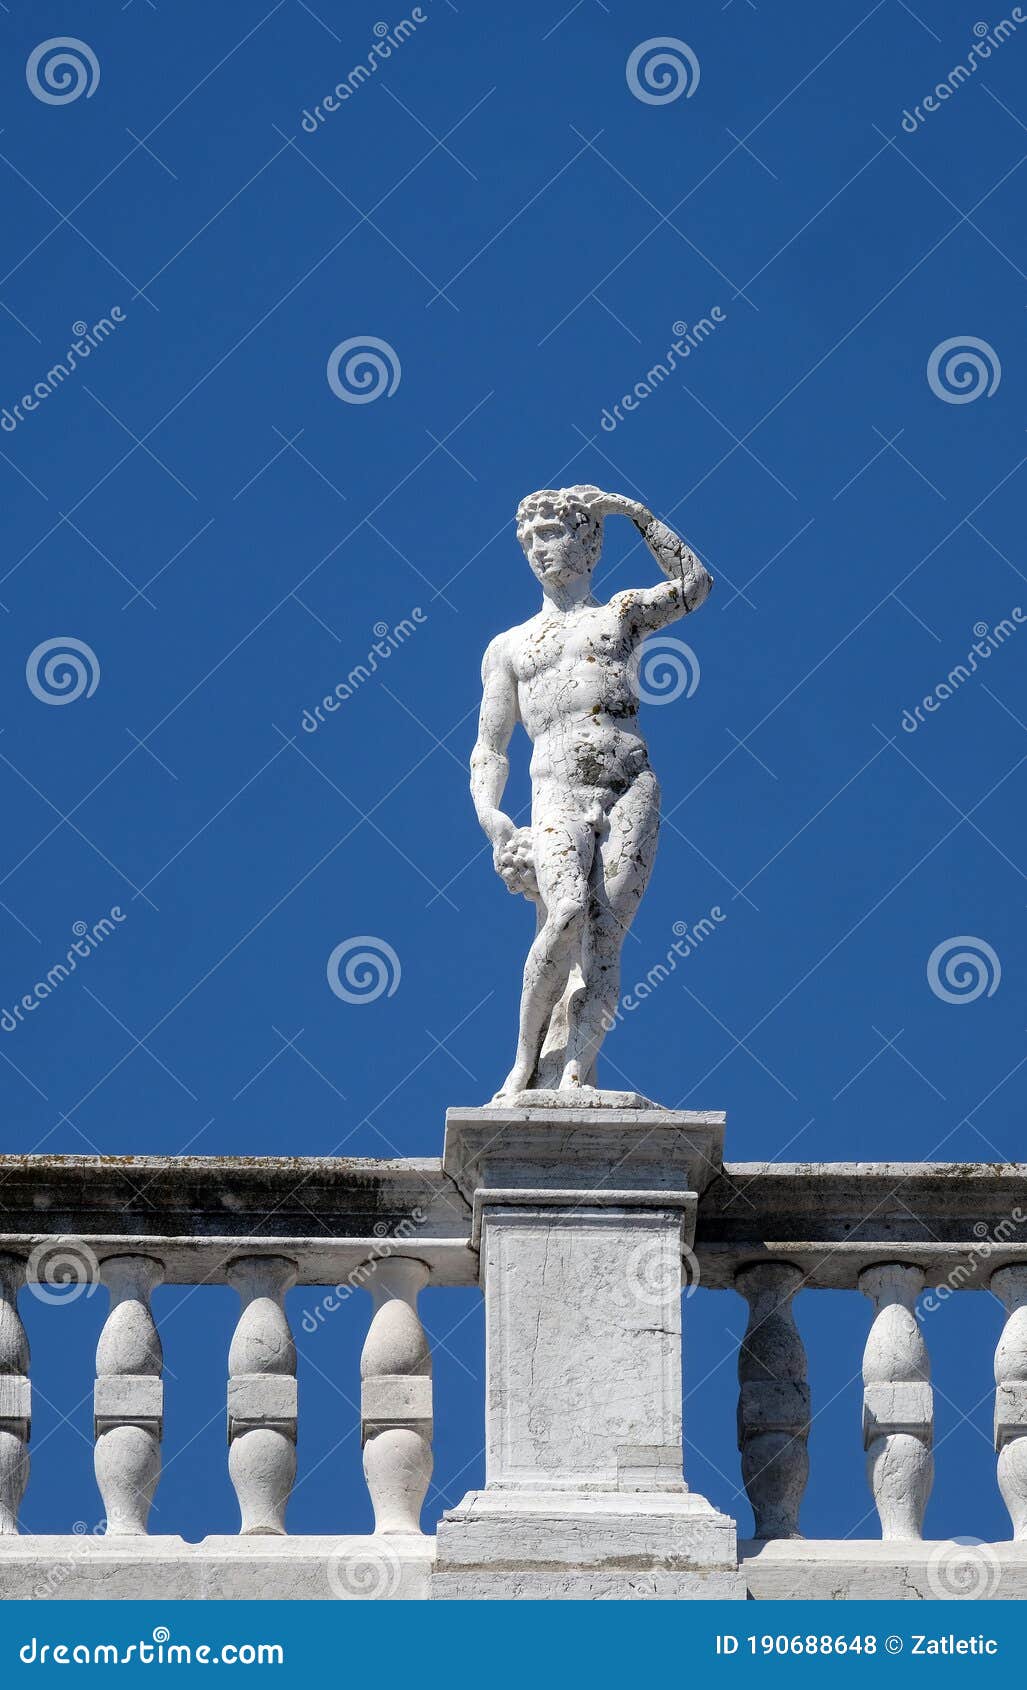 statue at the top of national library of st mark`s biblioteca marciana, venice, italy